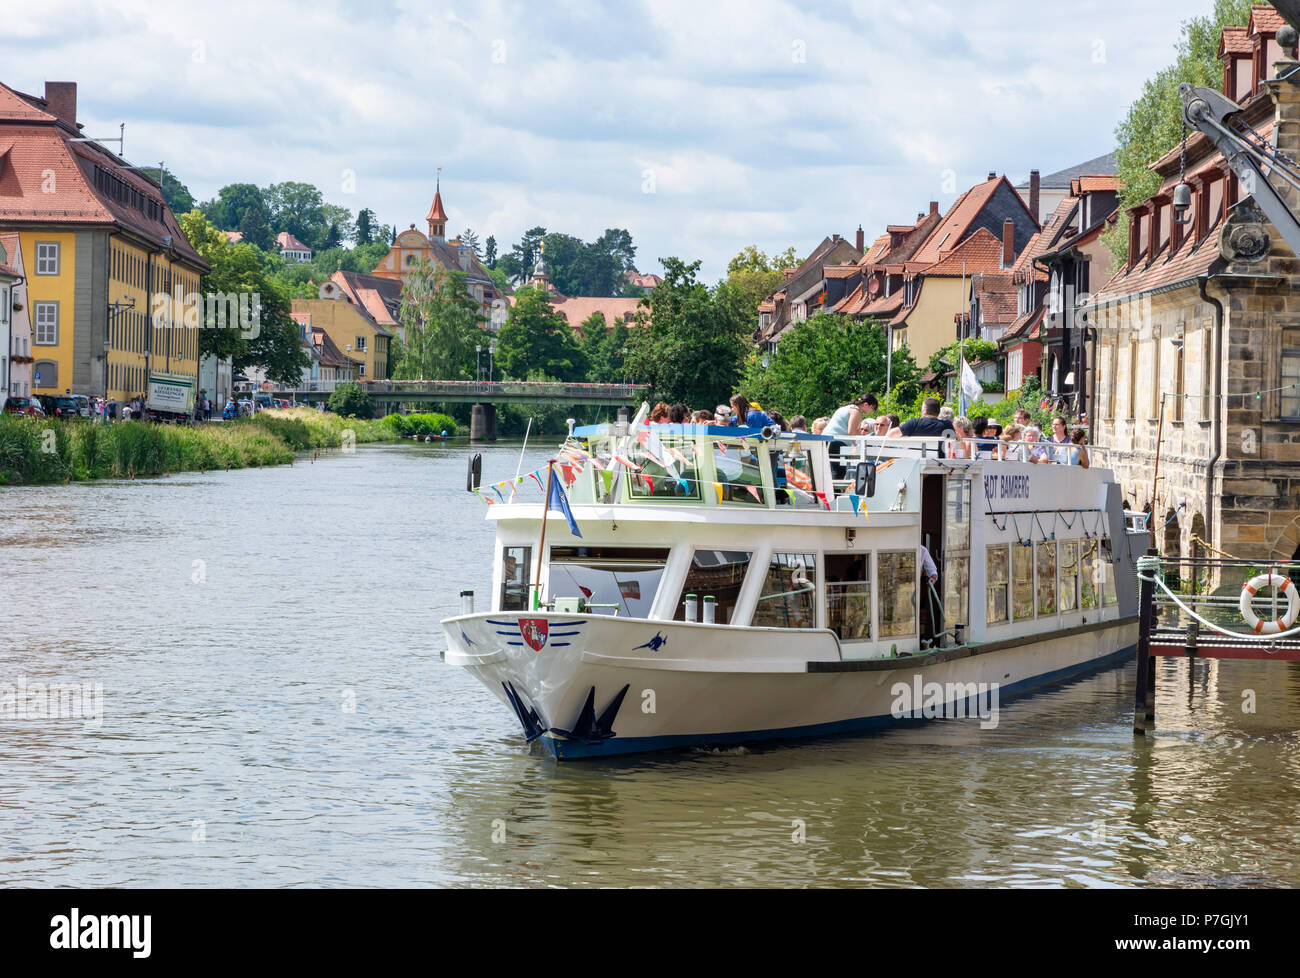 BAMBERG, GERMANY - JUNE 19: Tourists on a passenger ship at river Regnitz in Bamberg, Germany on June 19, 2018. Stock Photo